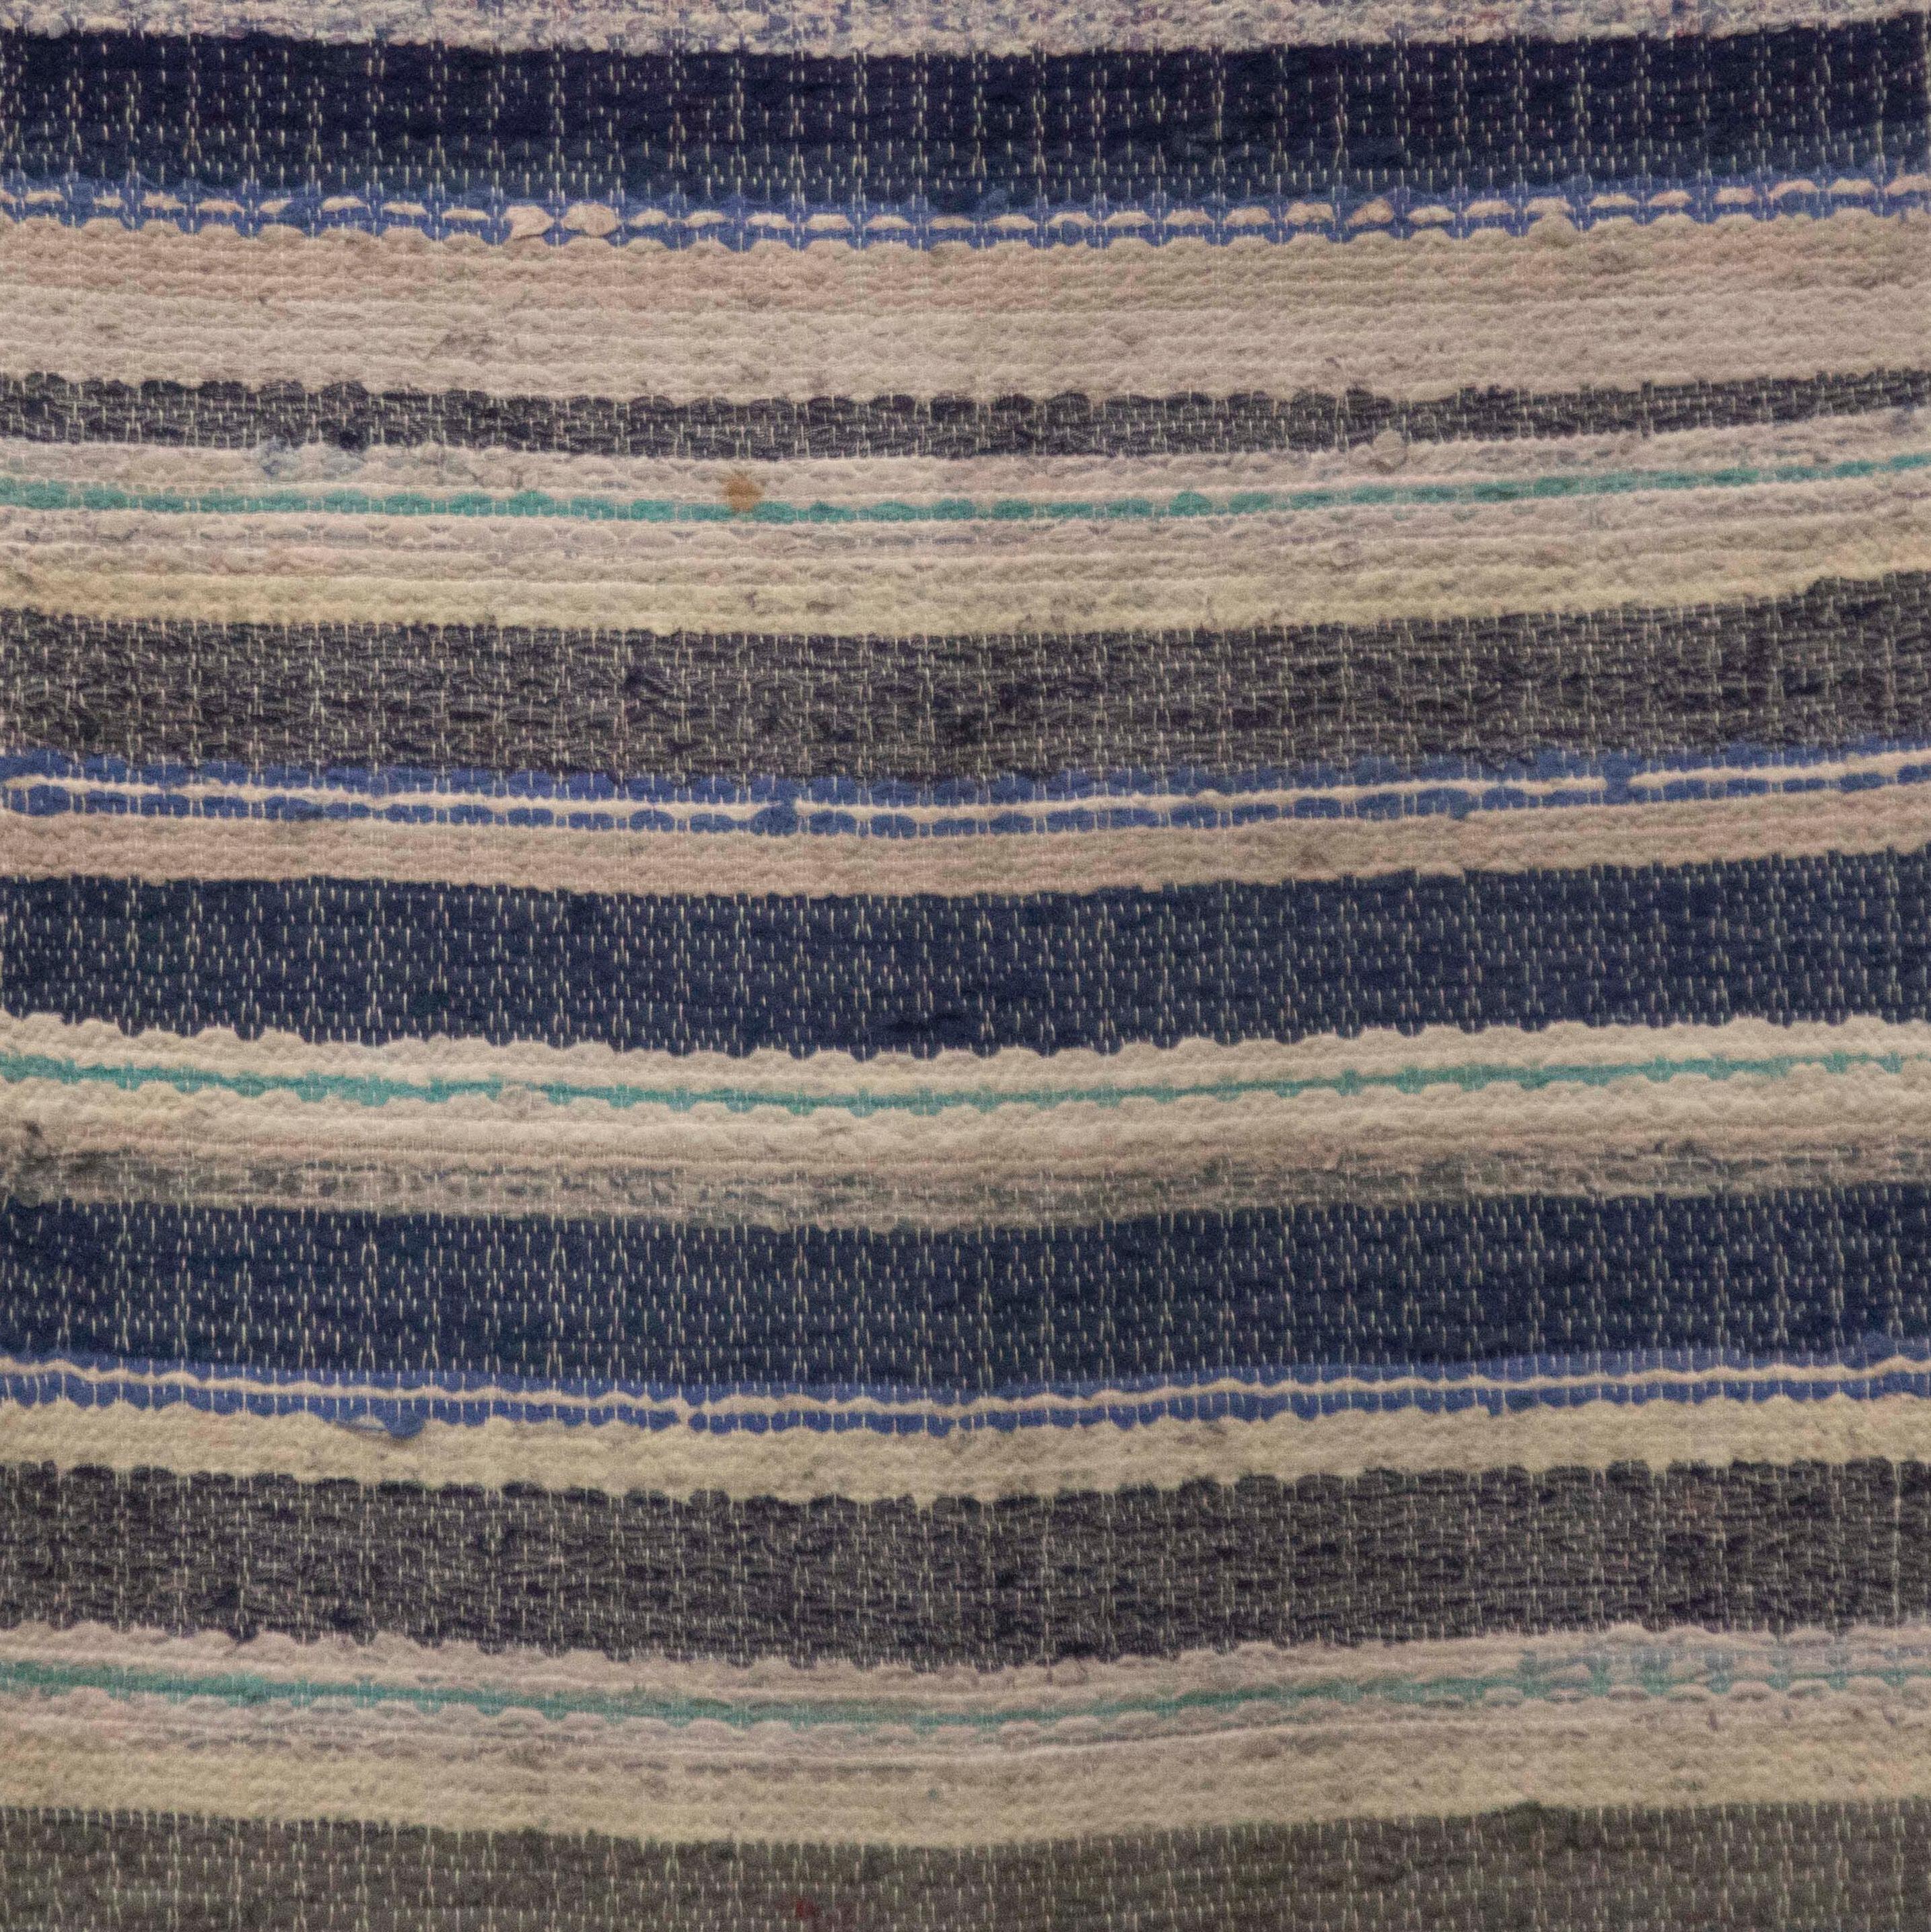 20th Century Swedish rag rug. Featuring a large stripe design throughout in tones of blue, black and grey. This rug can be machine-washed at 30 degrees.
RT6024576